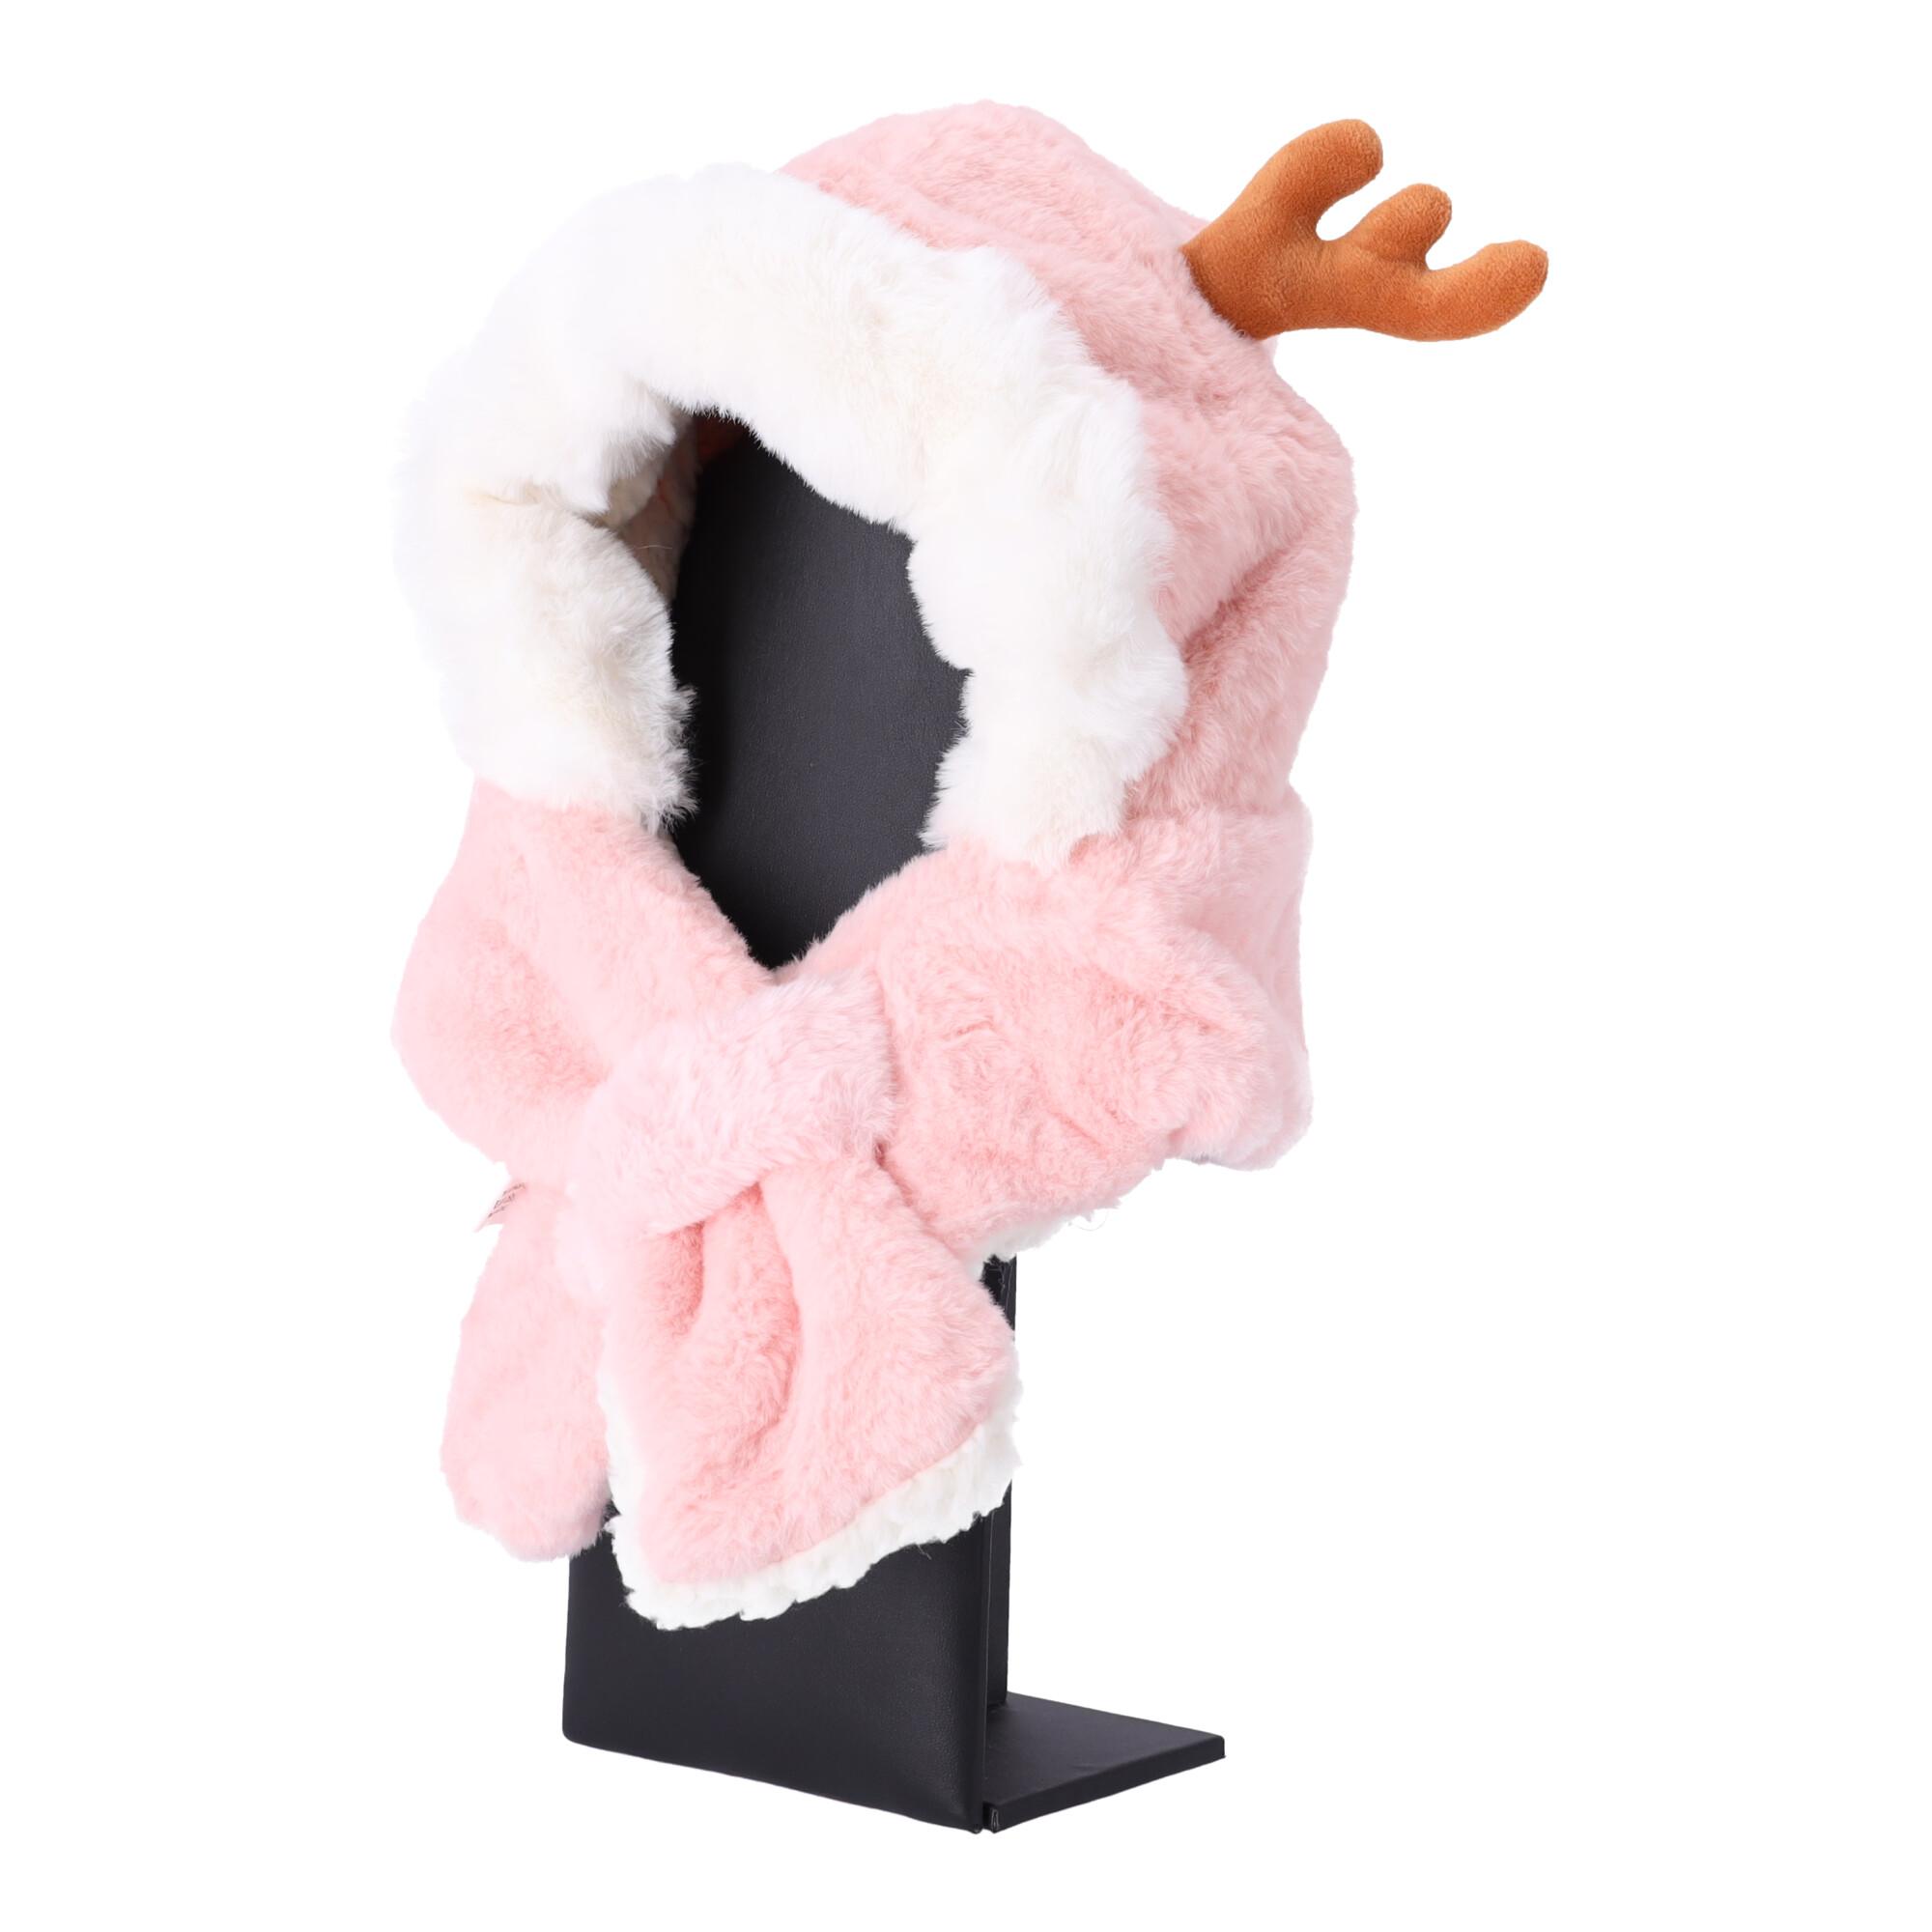 Children's plush hat with a scarf for children aged 1 to 7 – light pink with deer ears